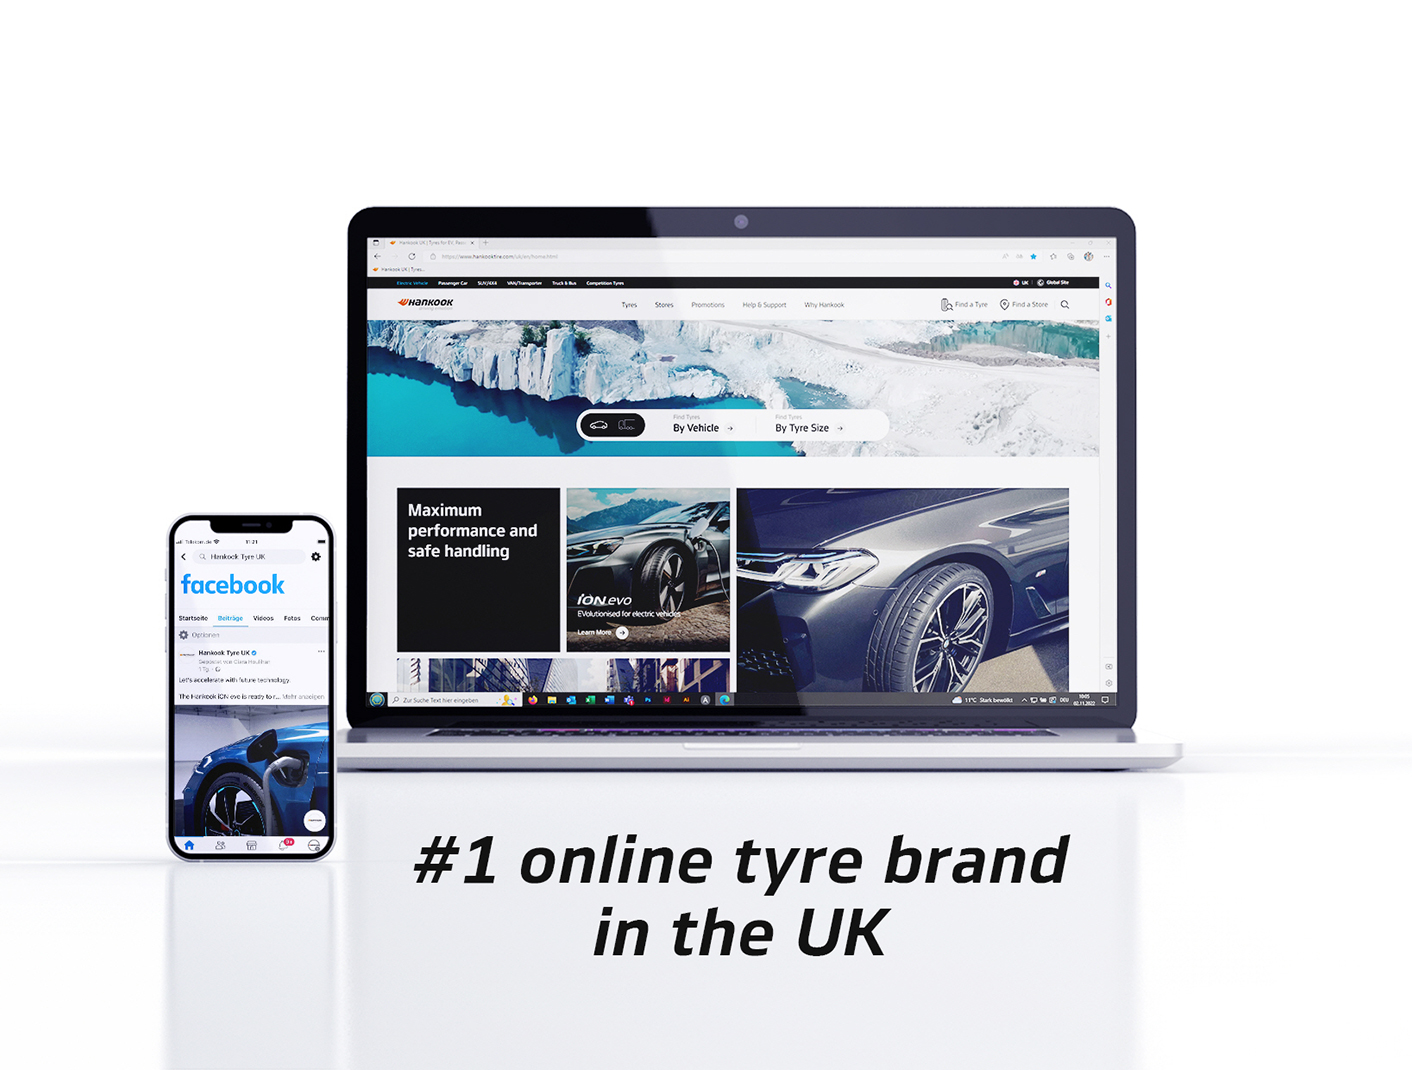 Hankook Tire named #1 online tire brand following Tyres & Accessories research